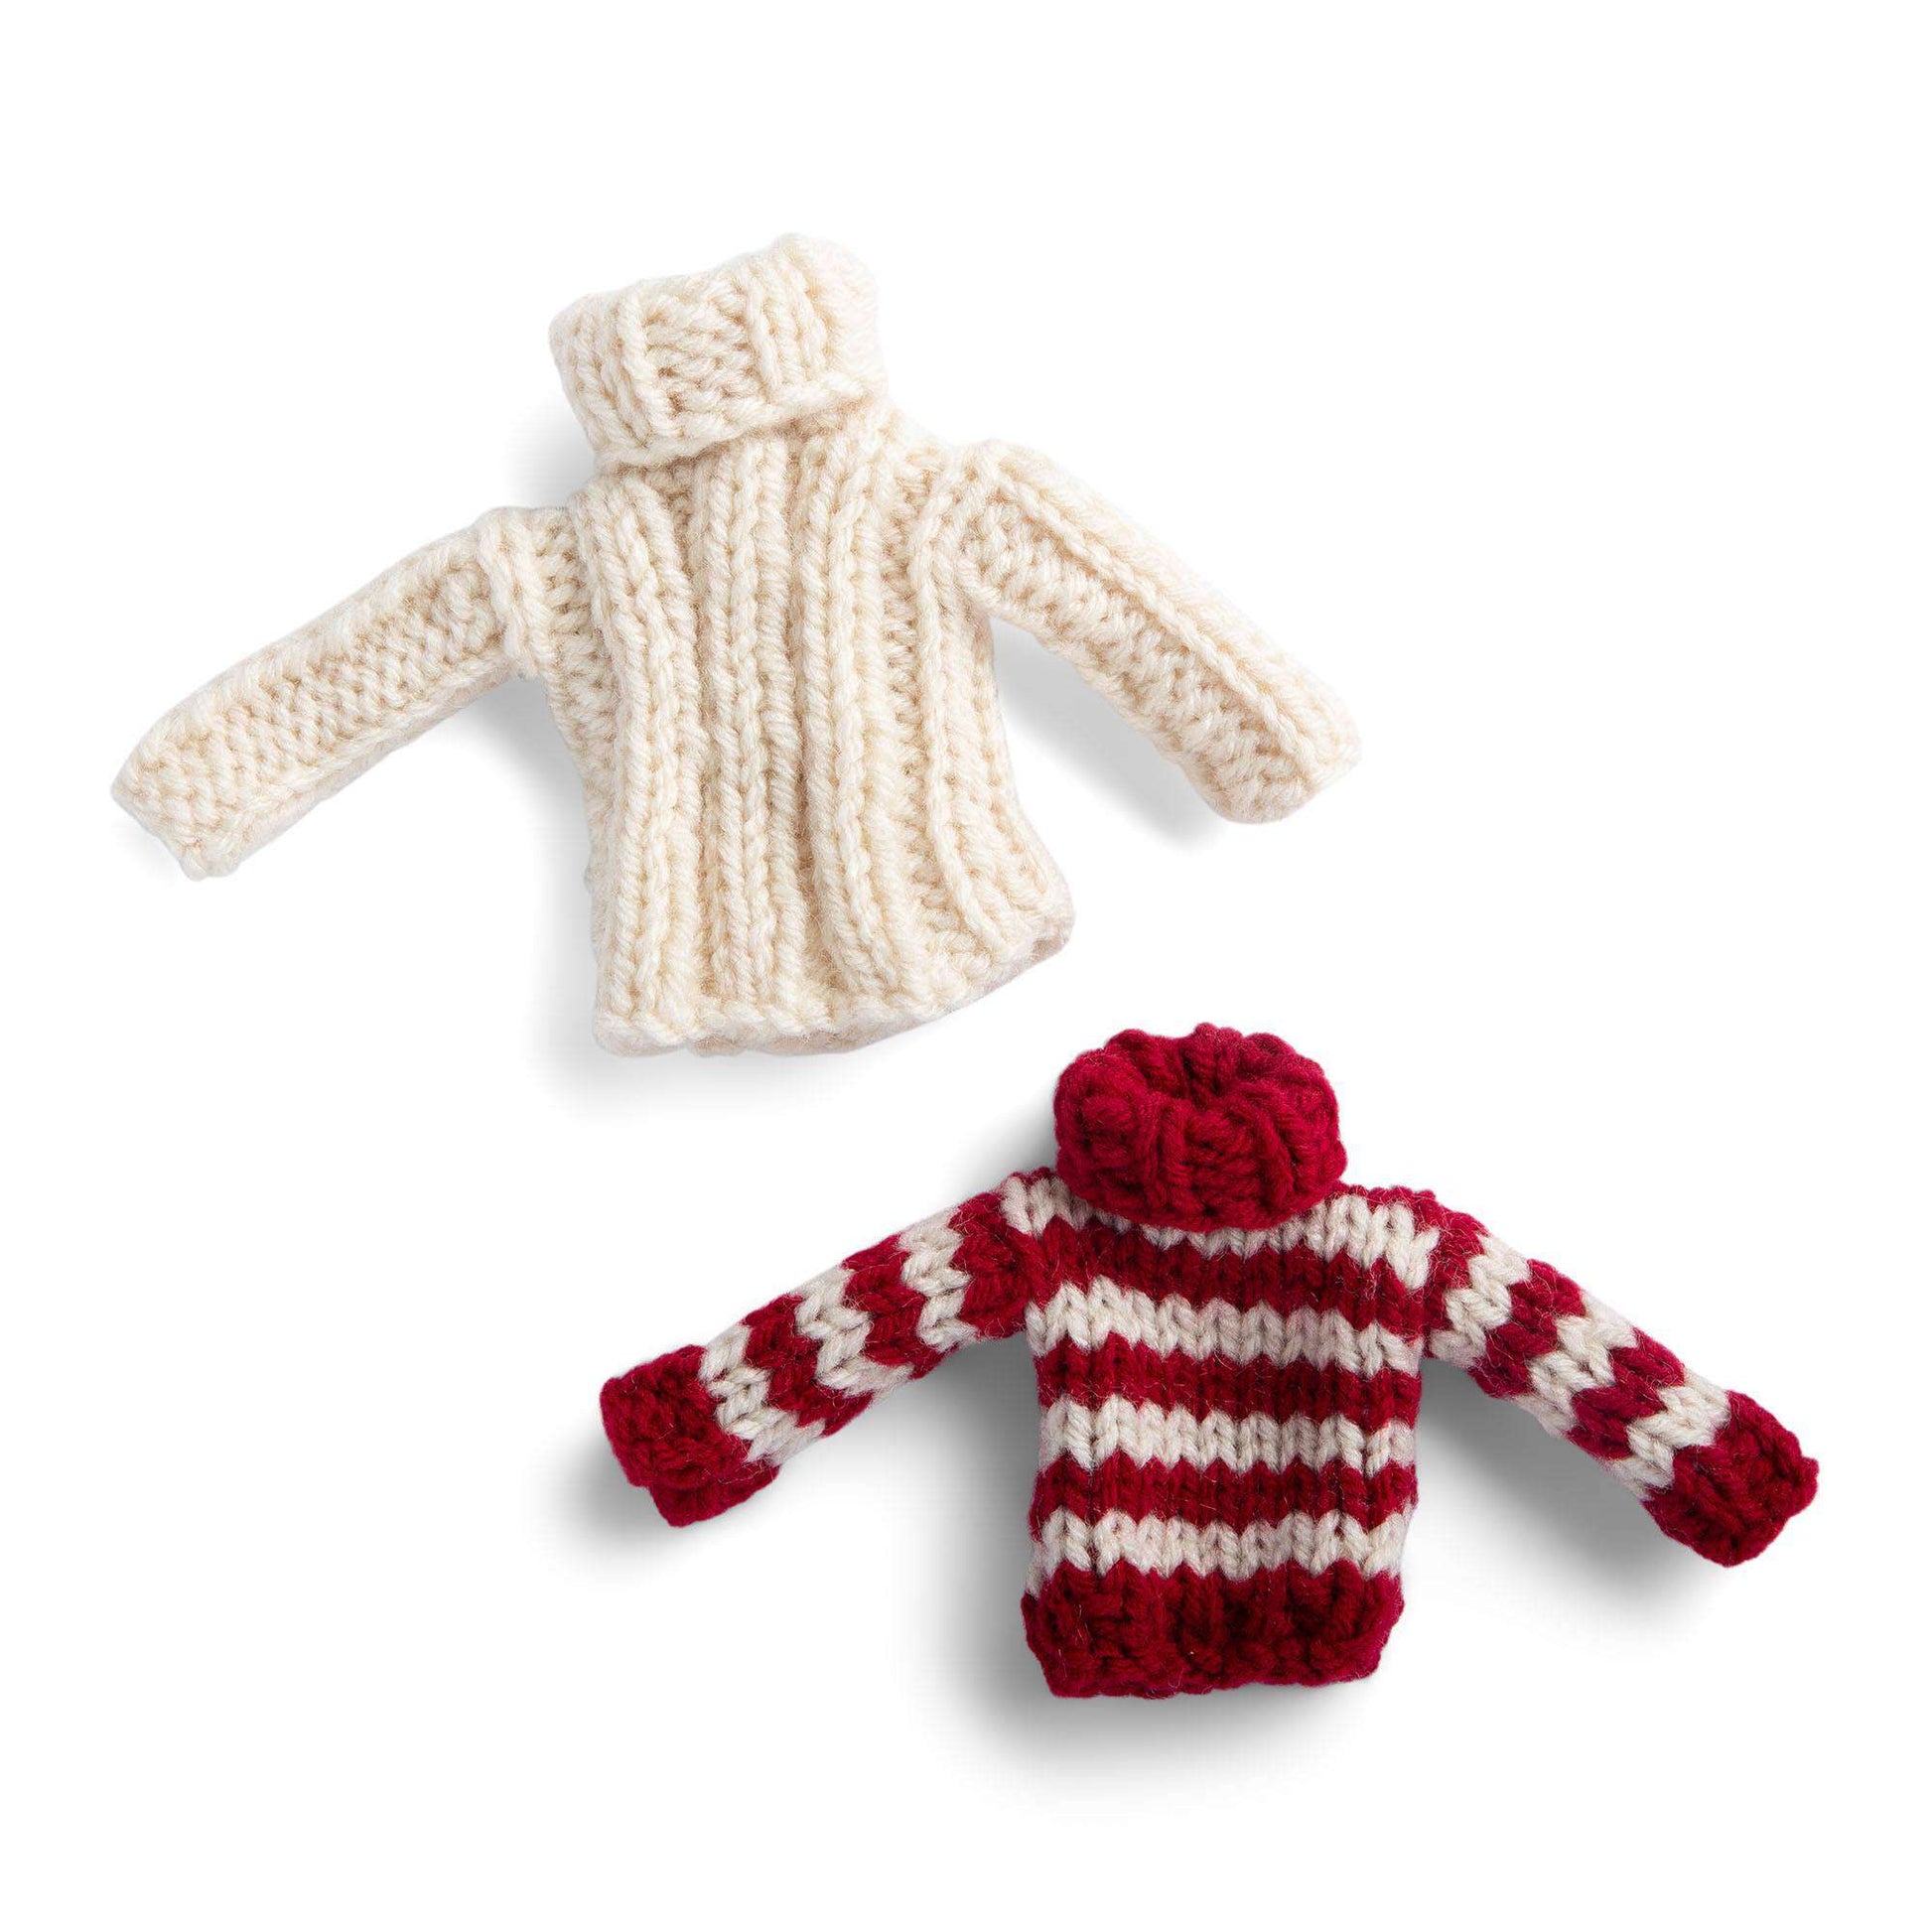 Free Red Heart Knit Mini Holiday Sweater Ornaments Pattern